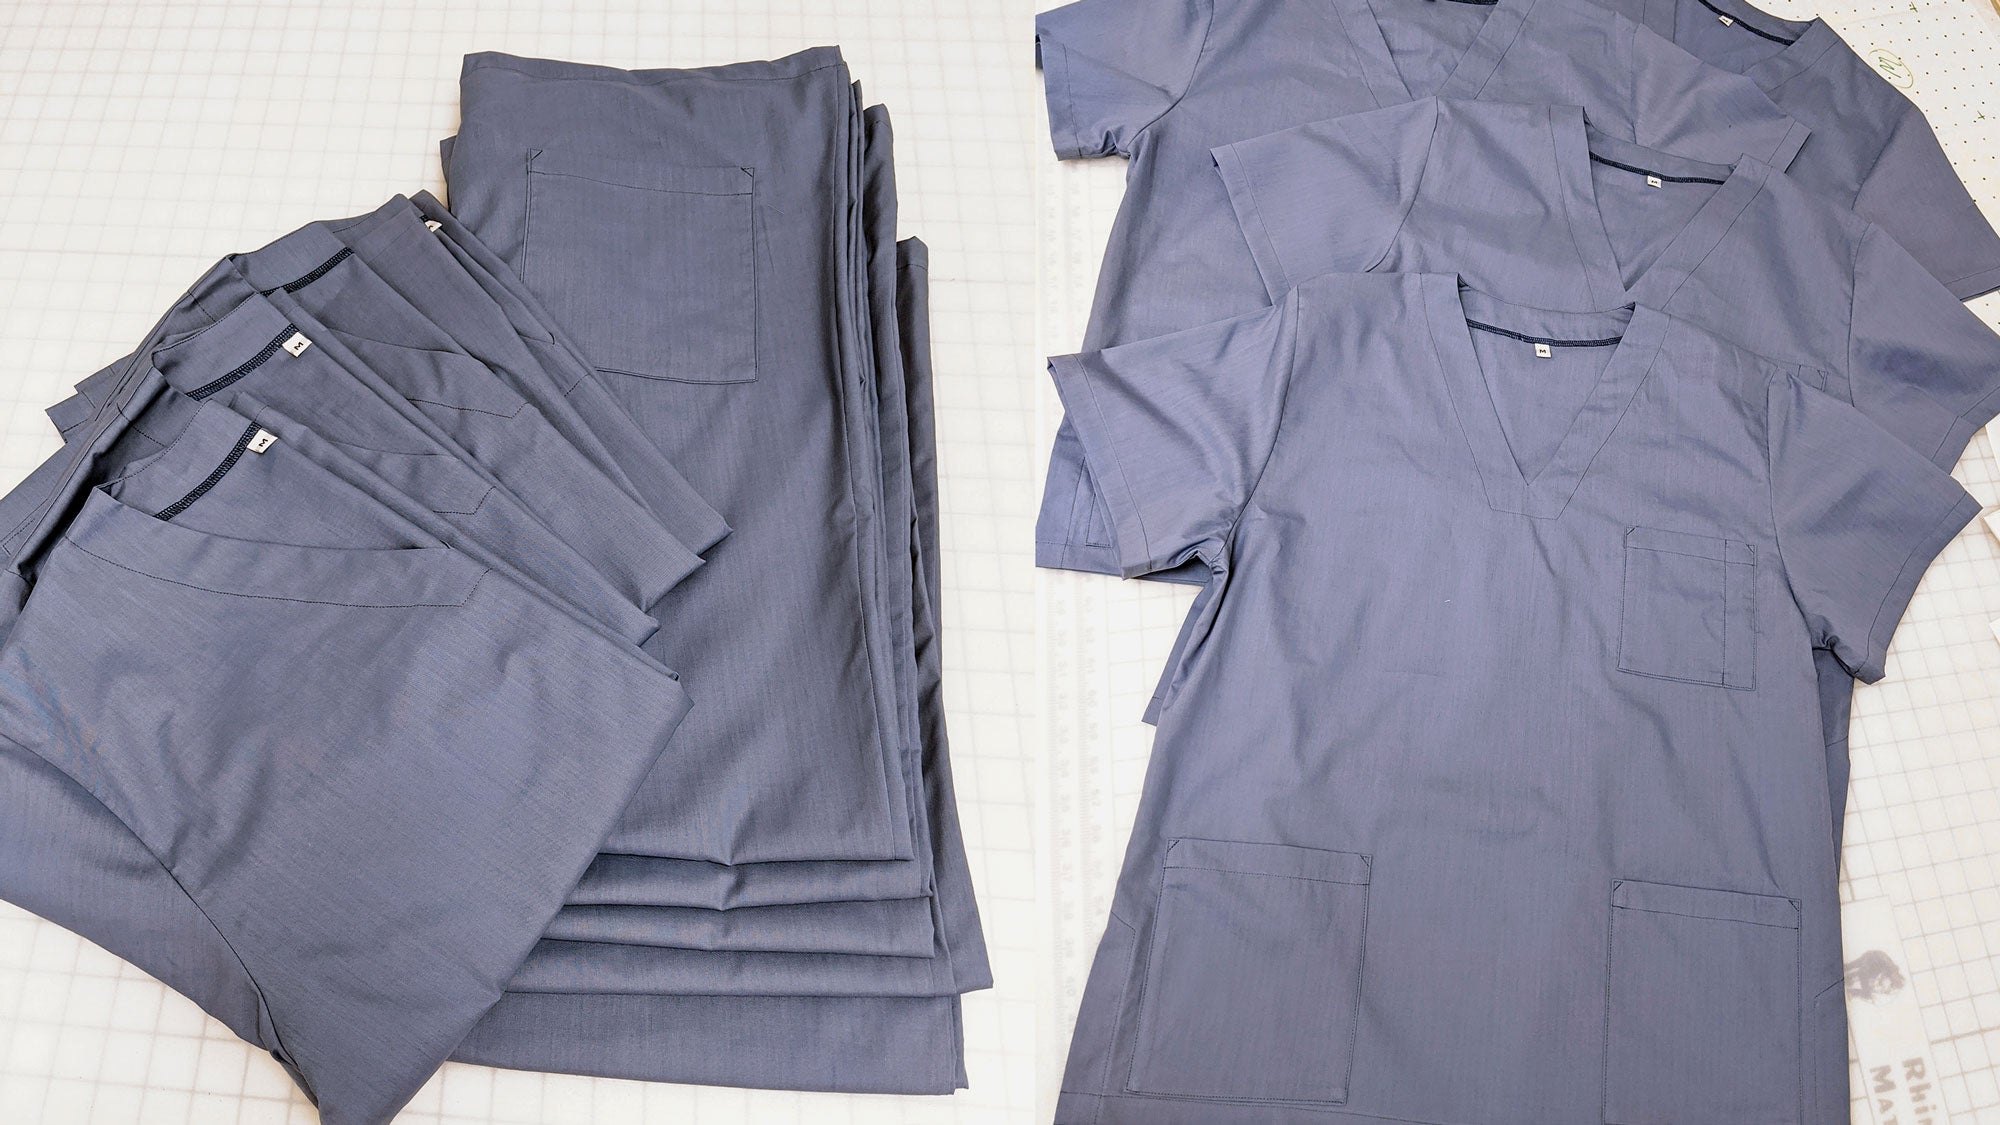 Volunteer sewing scrubs for donation to the NHS in England